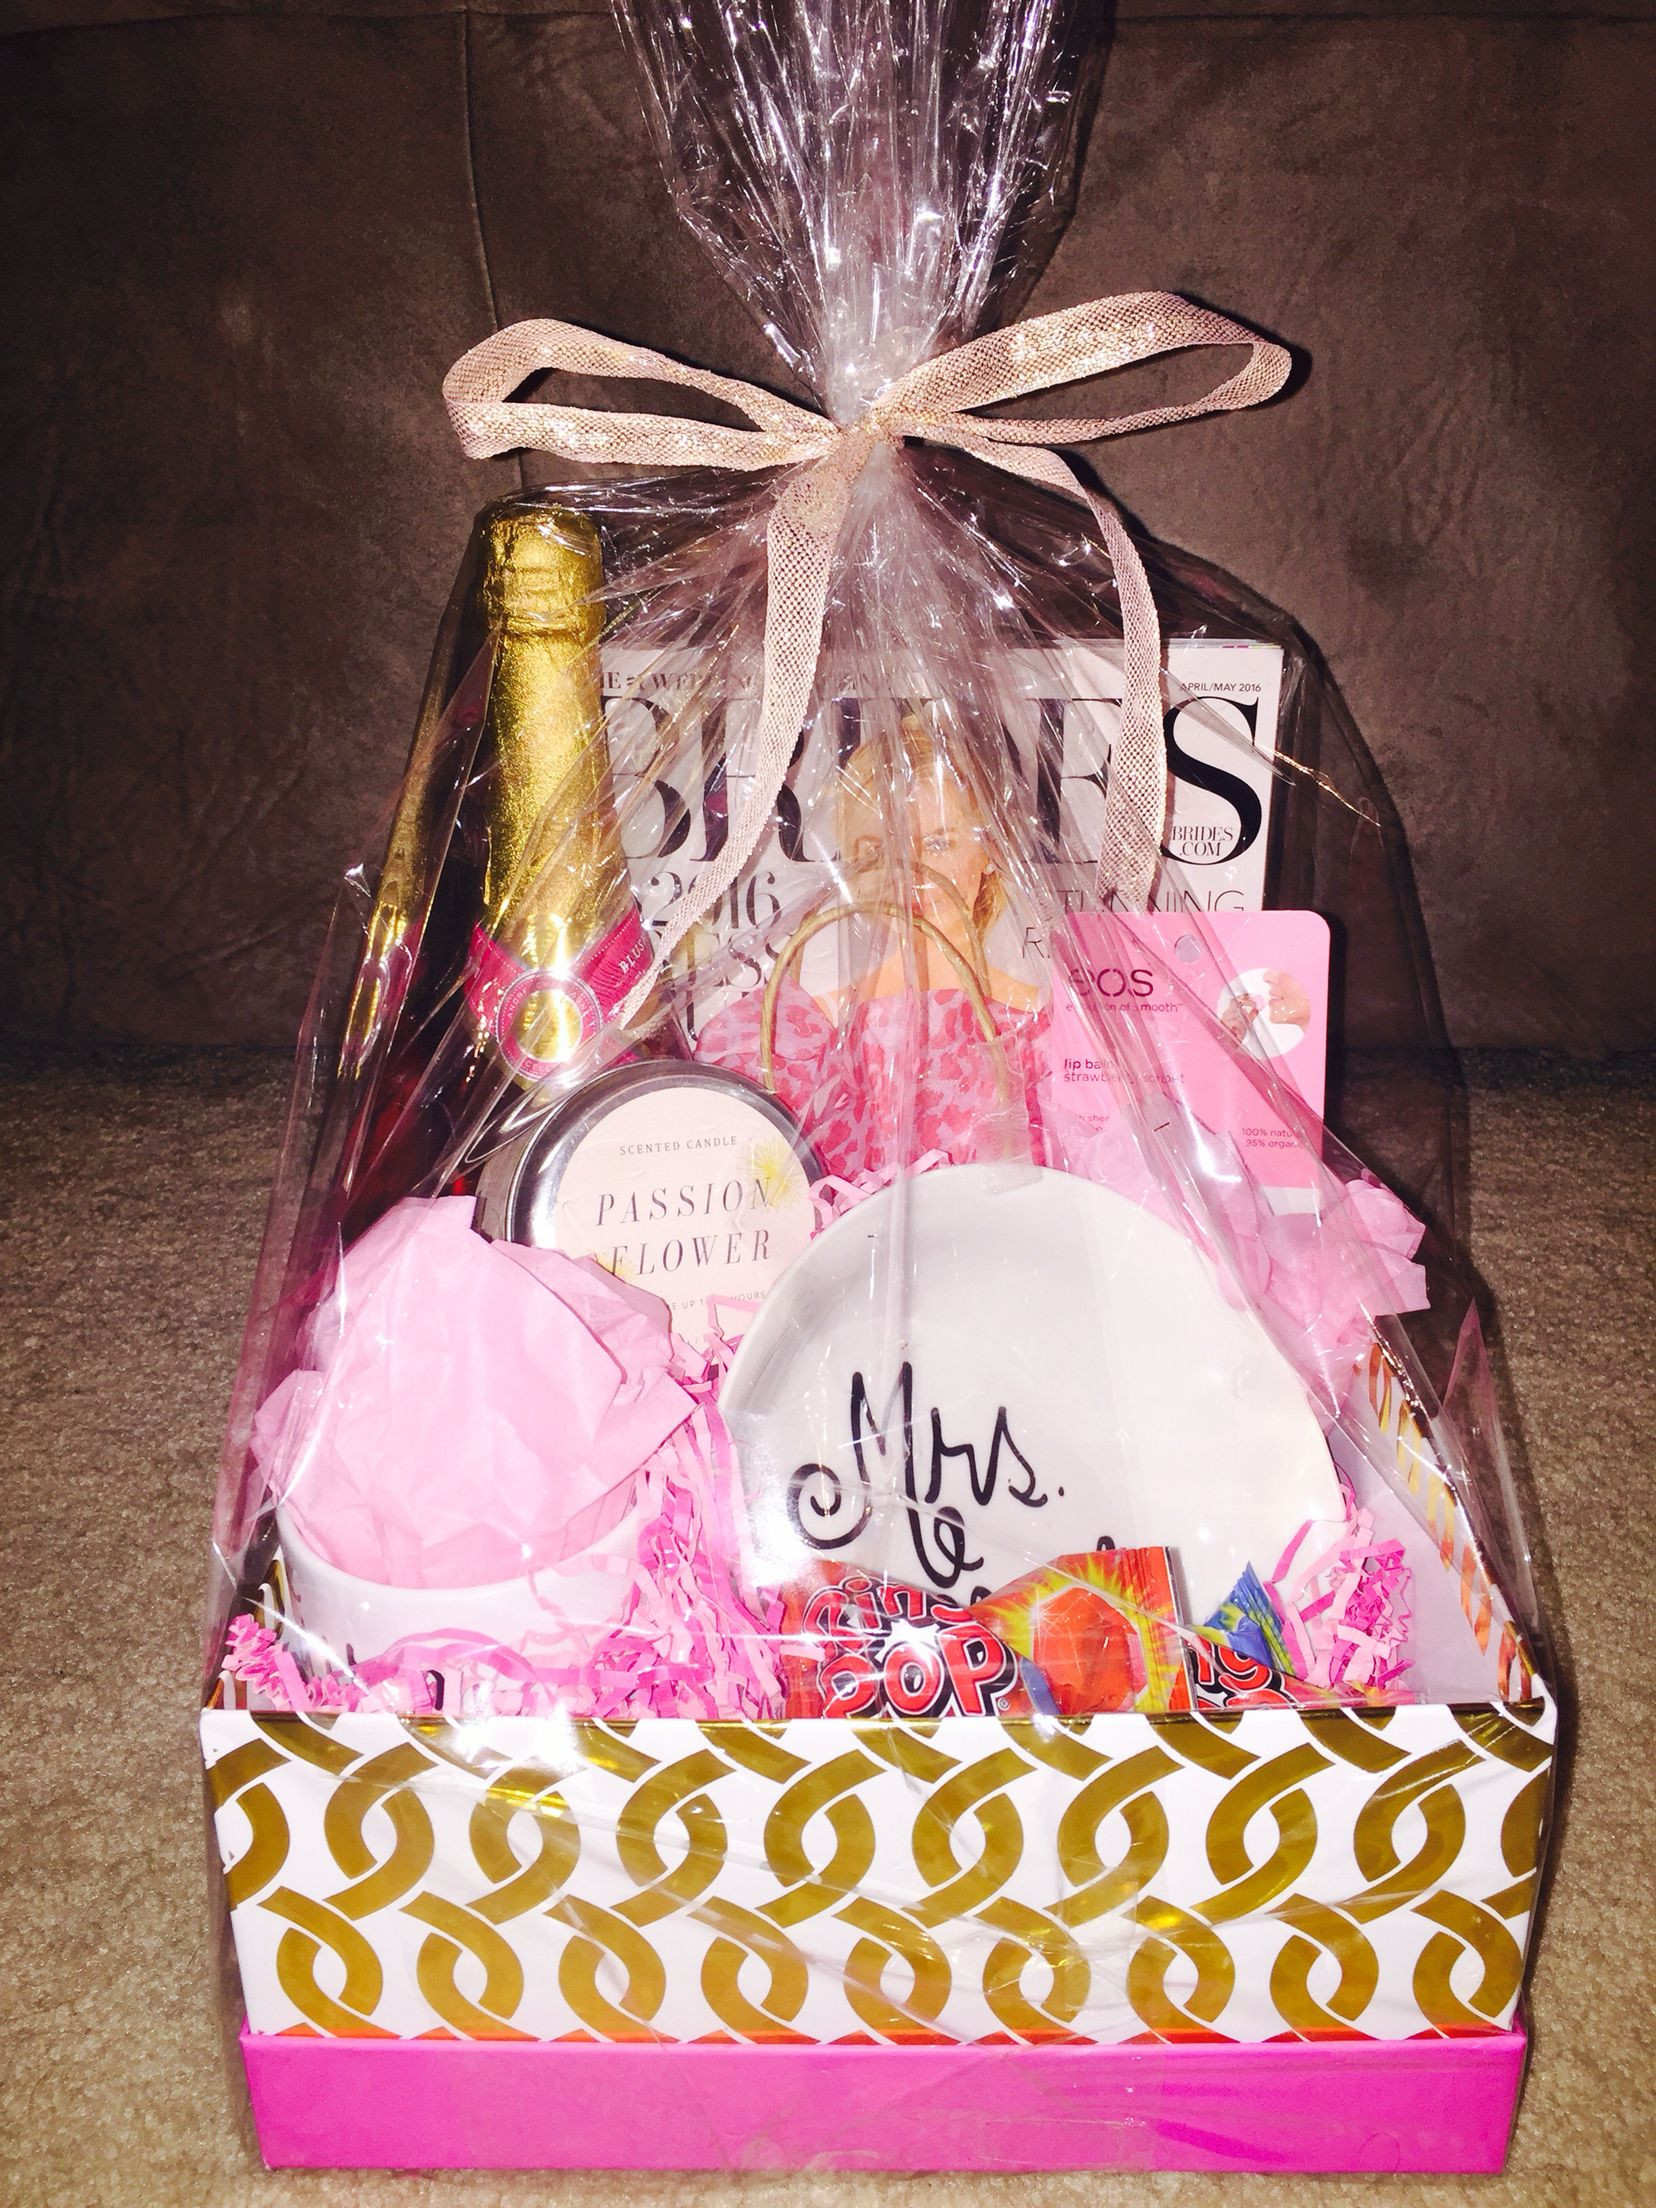 Wedding Gifts For Friends
 Engagement t basket I made for my newly engaged best